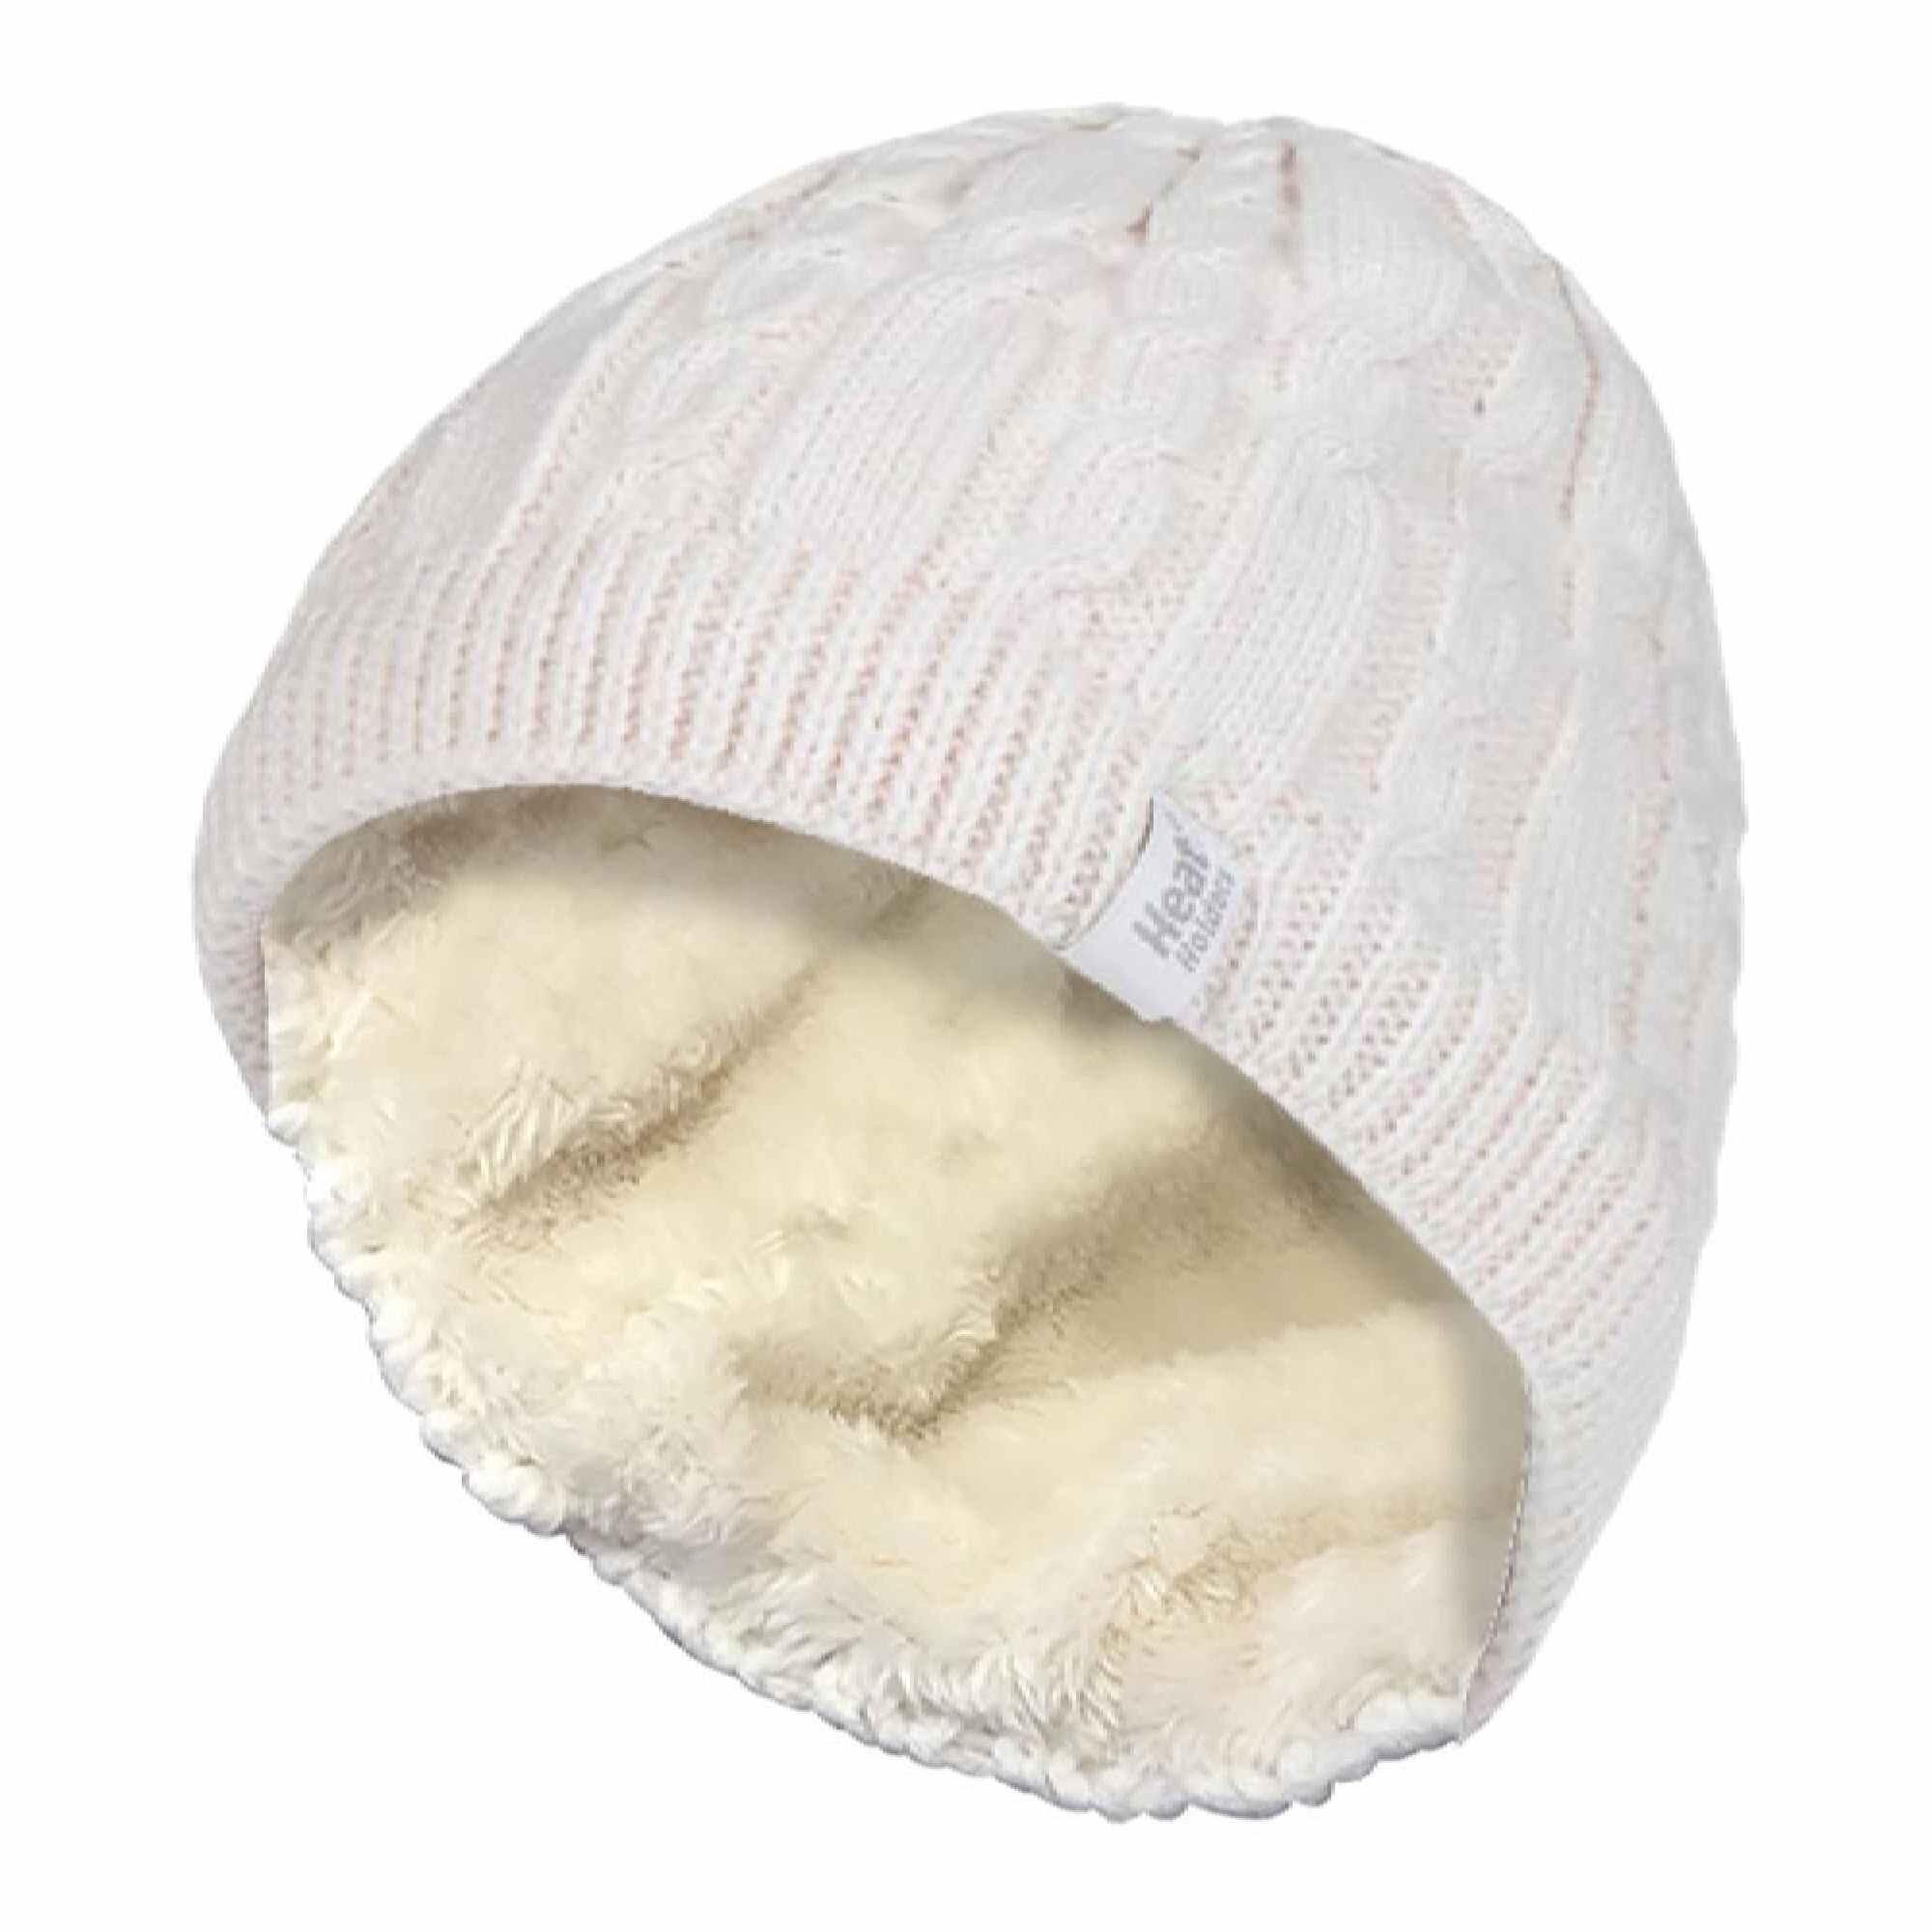 HEAT HOLDERS Womens Ribbed Cable Knit Fleece Lined Thermal Knitted Beanie Hat